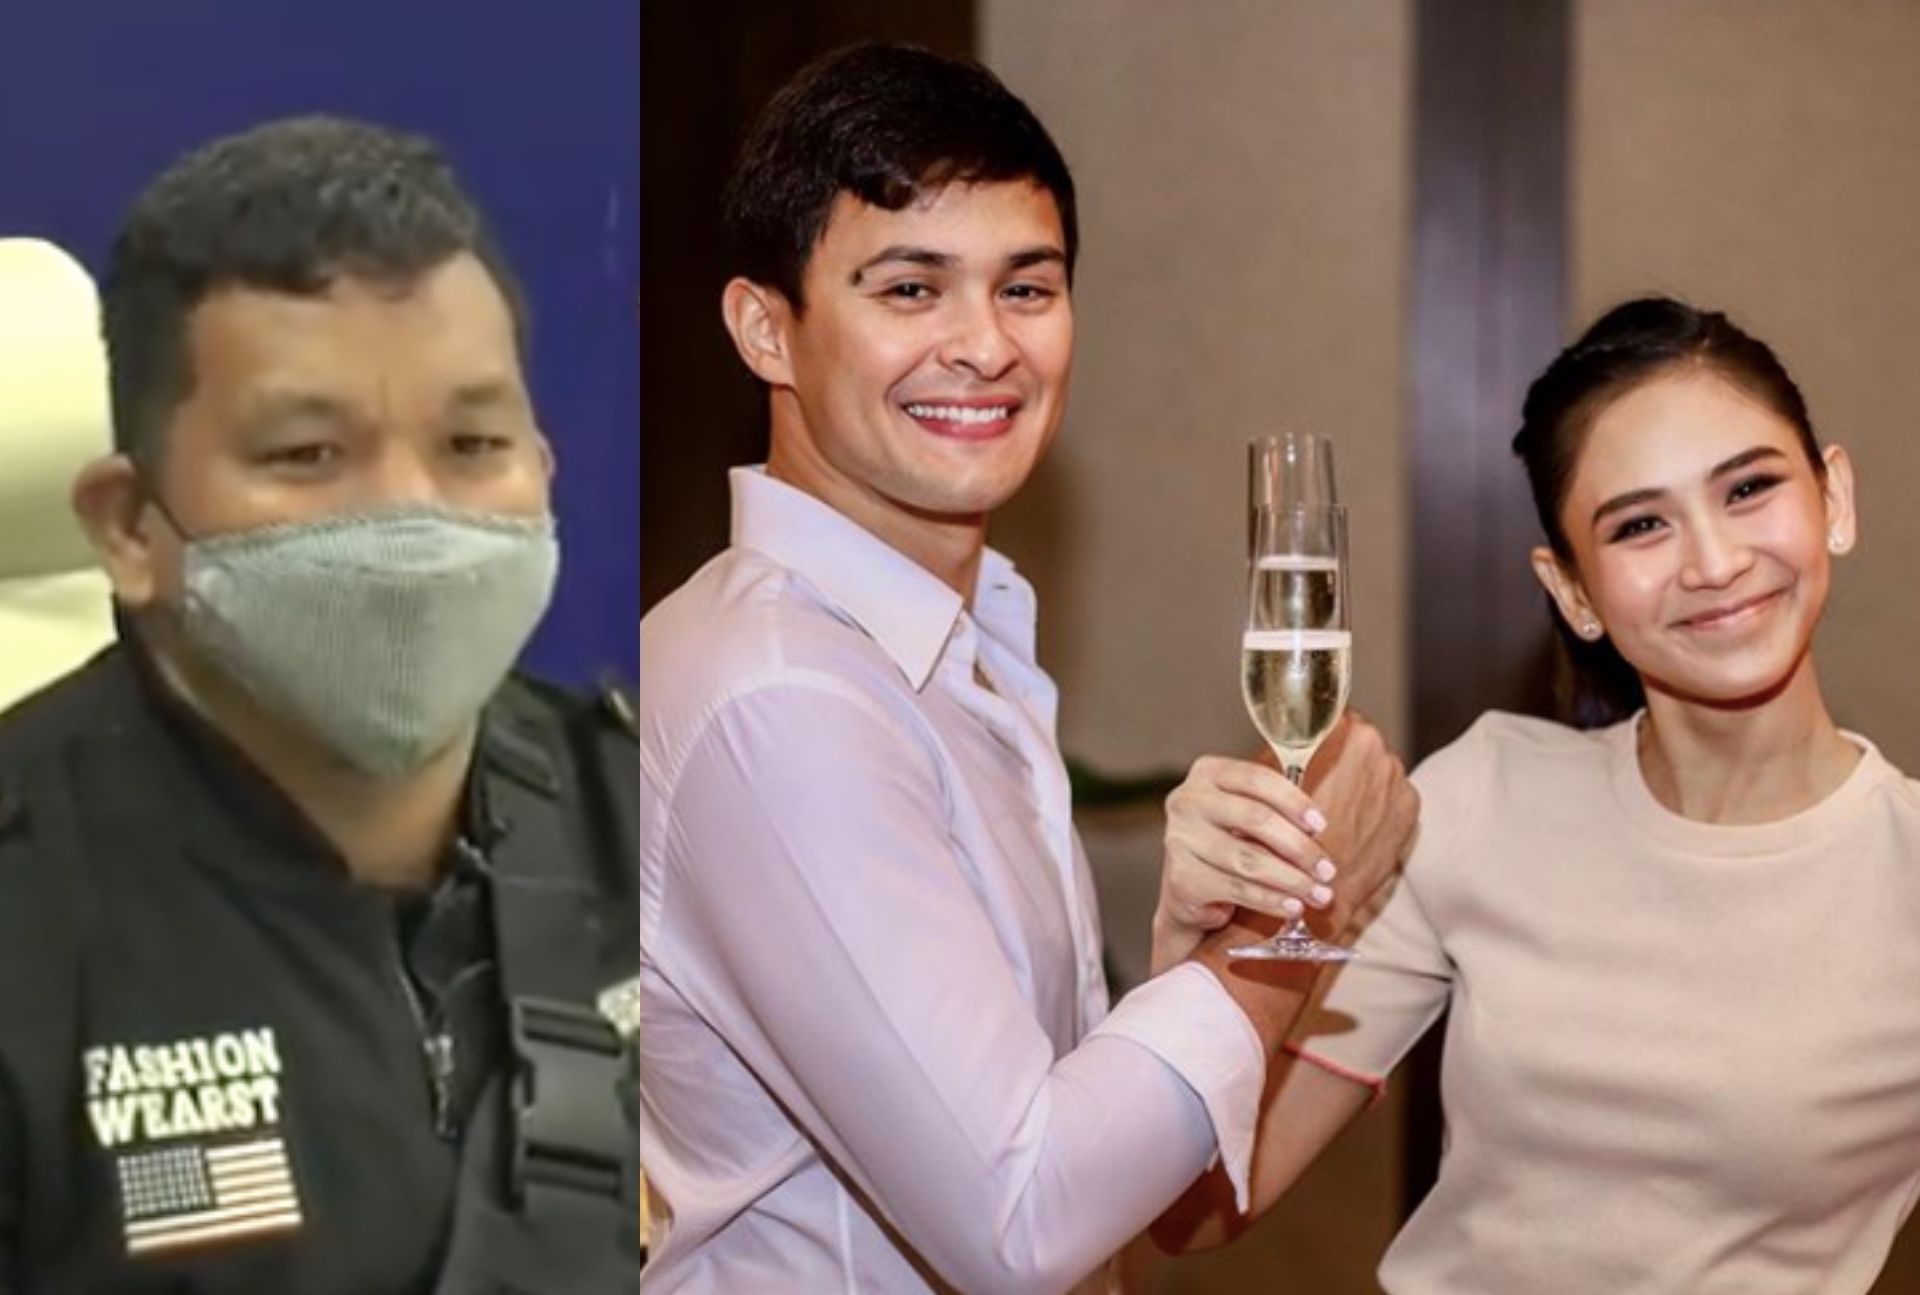 At left, Geronimo family bodyguard Jerry Tamara; At right, the wedded actor couple Matteo Guidicelli and Sarah Geronimo <i></noscript>Photo: Tulfo in Action screenshot, Matteo Guidicelli / IG</i>